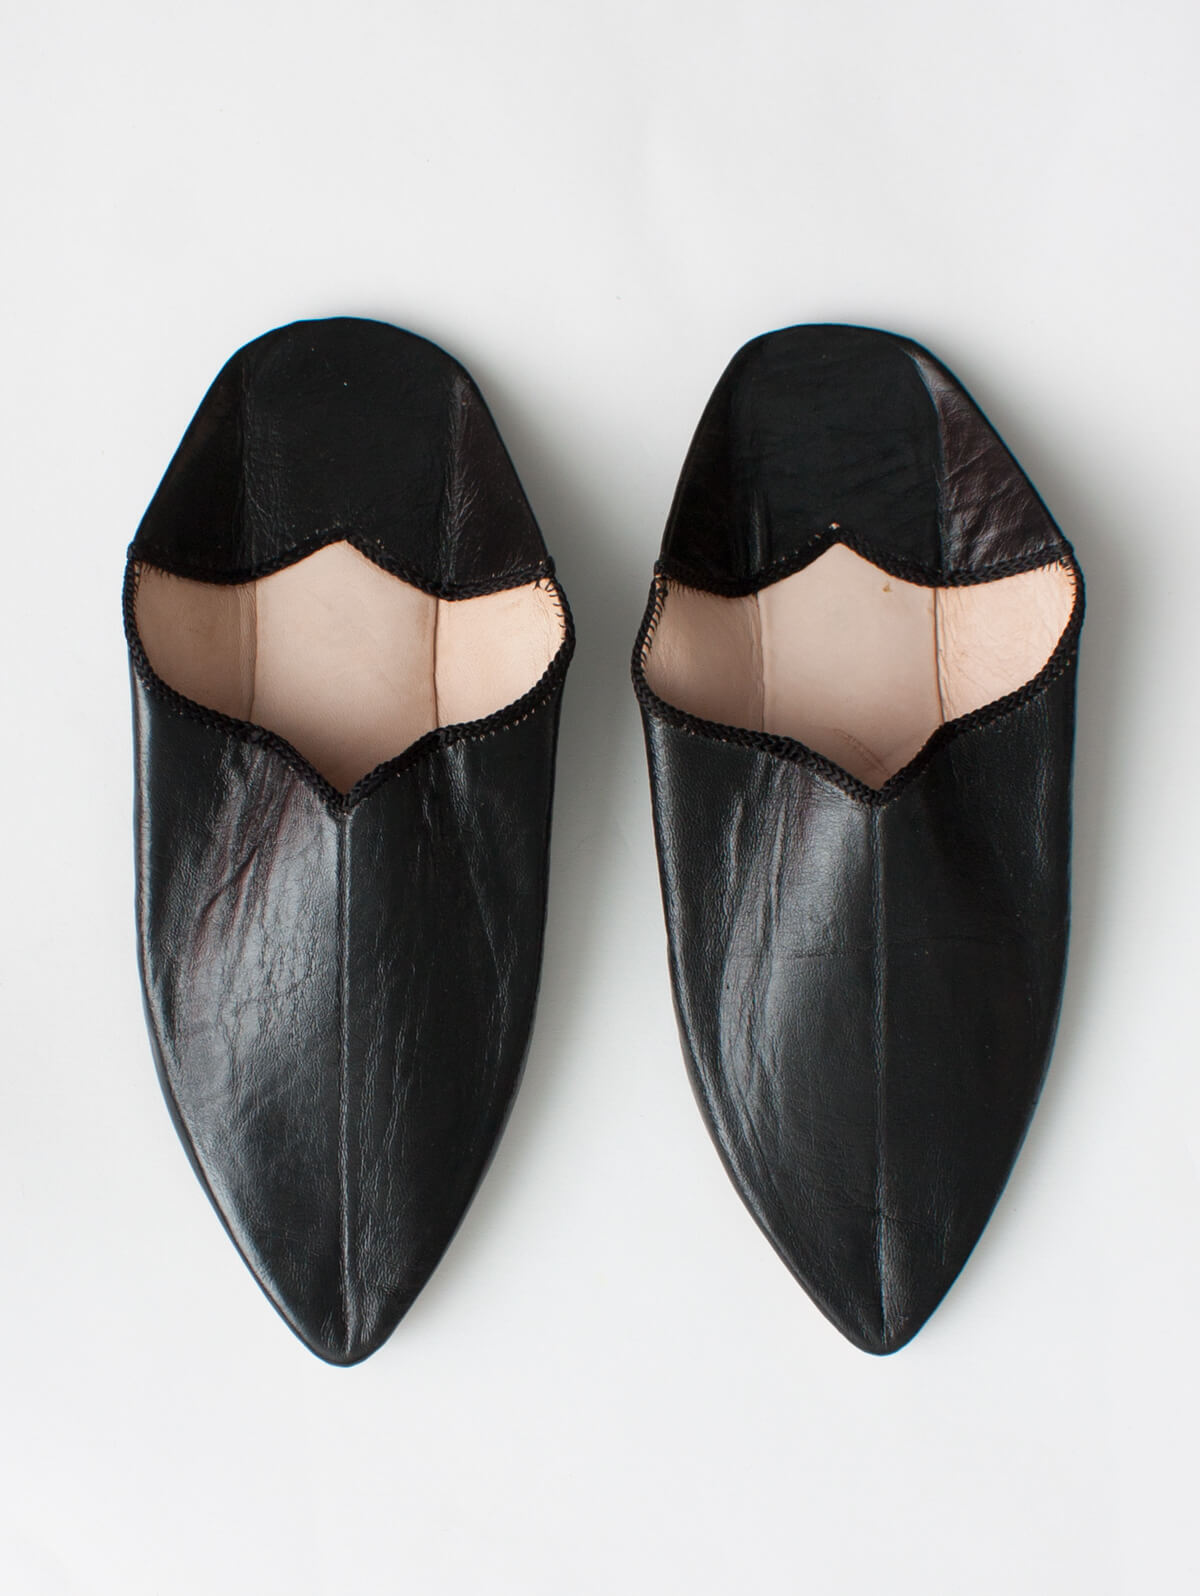 Moroccan Plain Pointed Babouche Slippers, Black